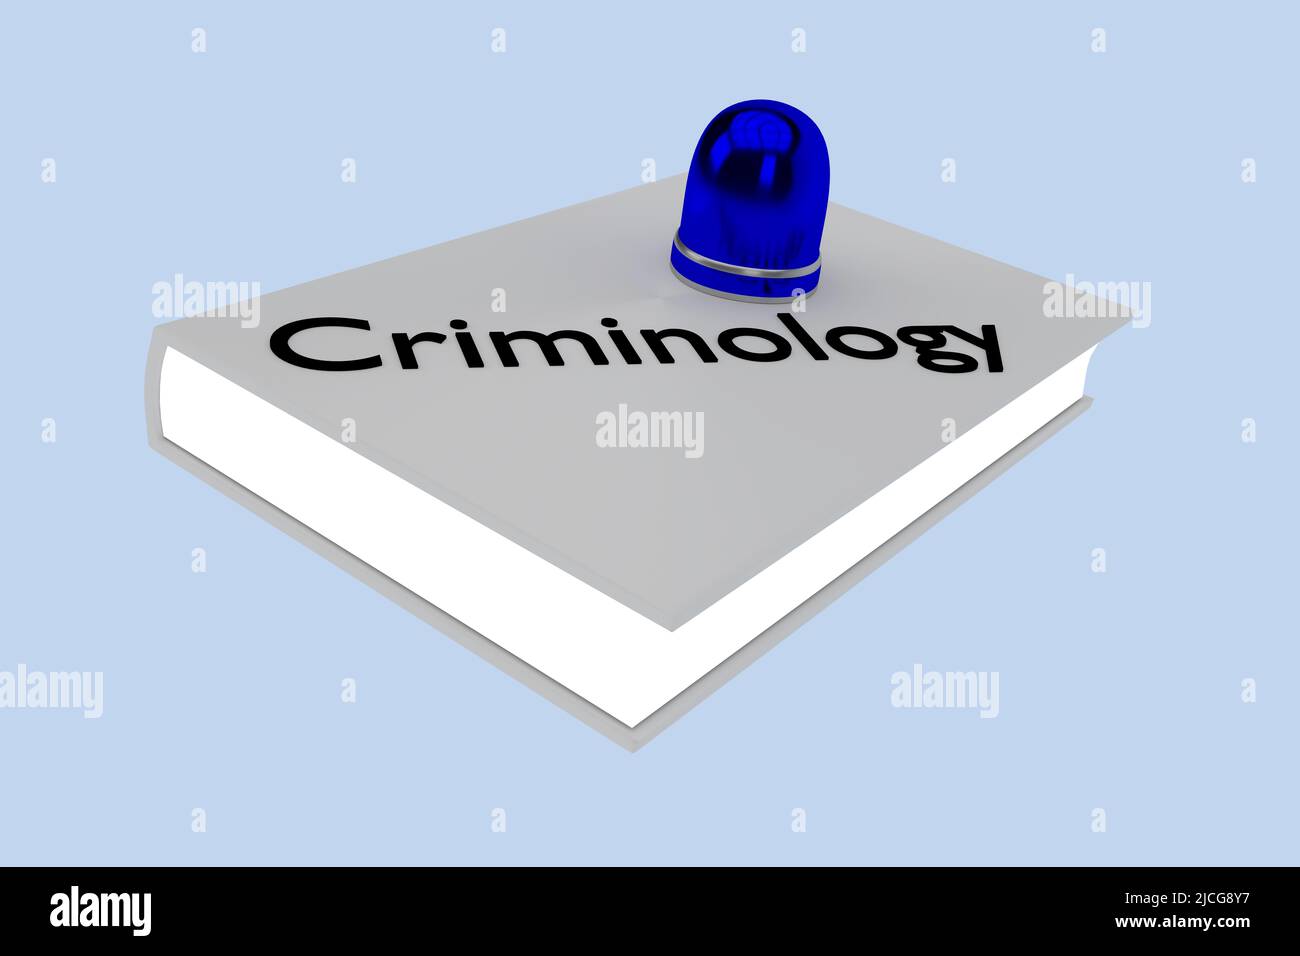 3D illustration of a symbolic police lamp on a criminology book Stock Photo